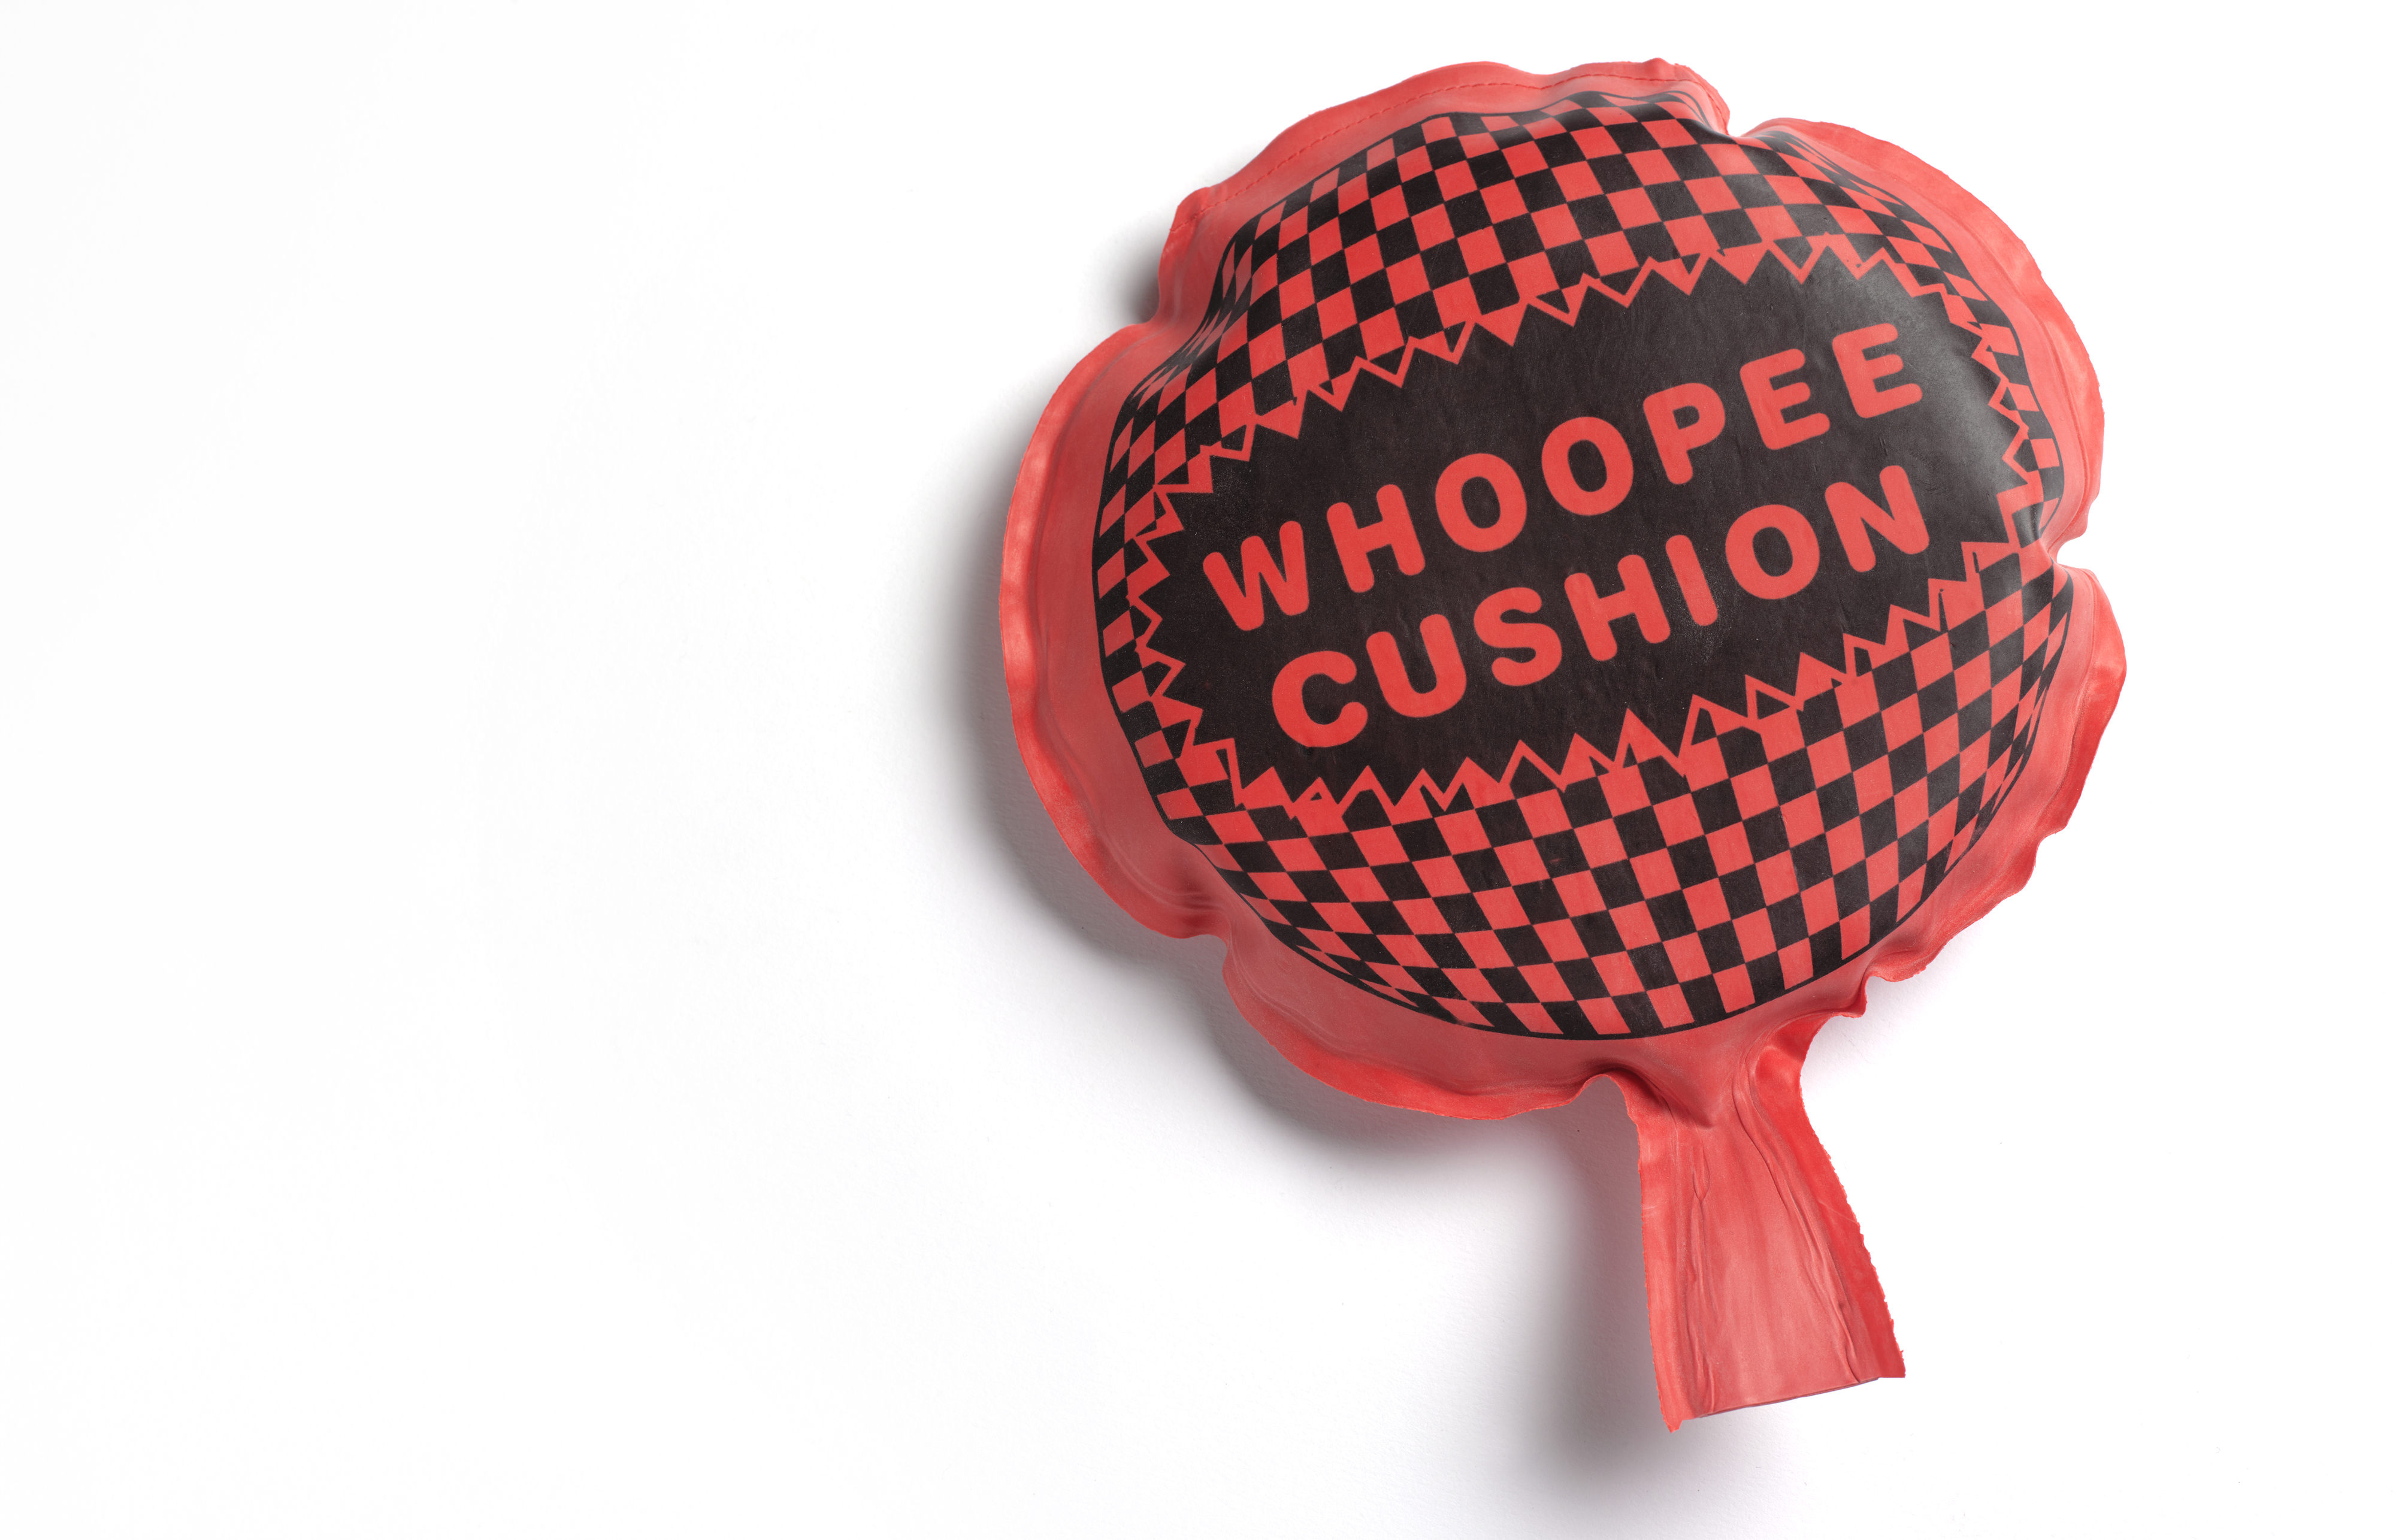 A whoopee cushion with &quot;WHOOPEE CUSHION&quot; text, checkered pattern on top, inflated on white background